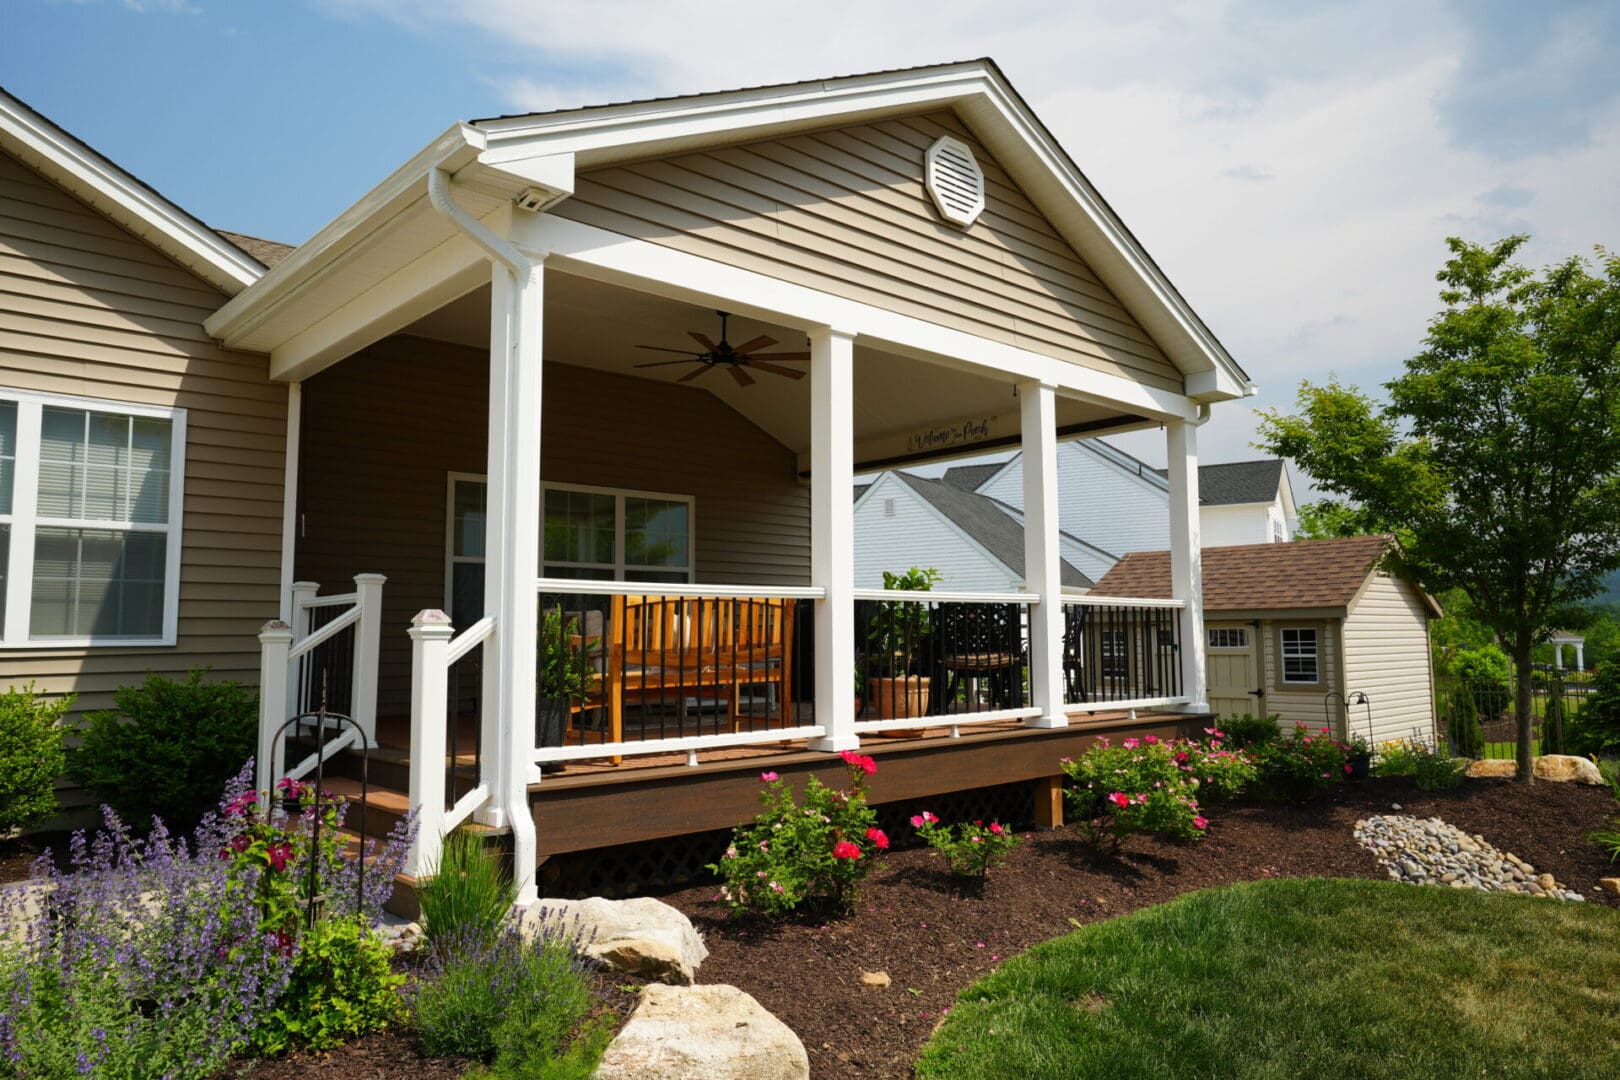 A custom home with a porch and landscaping.